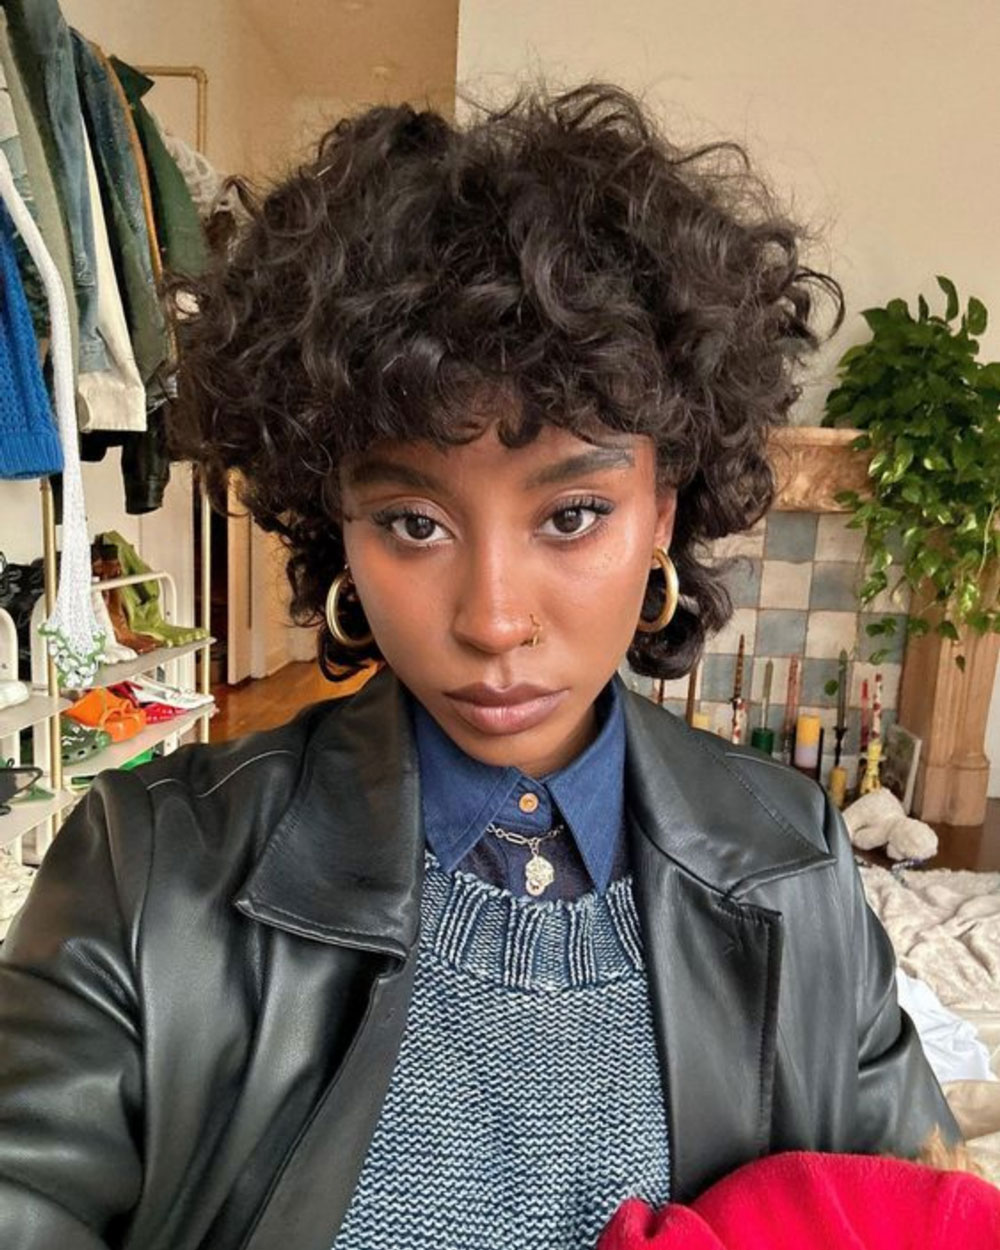 15 Photos of Curly Cub Cuts to Show Your Stylist | NaturallyCurly.com